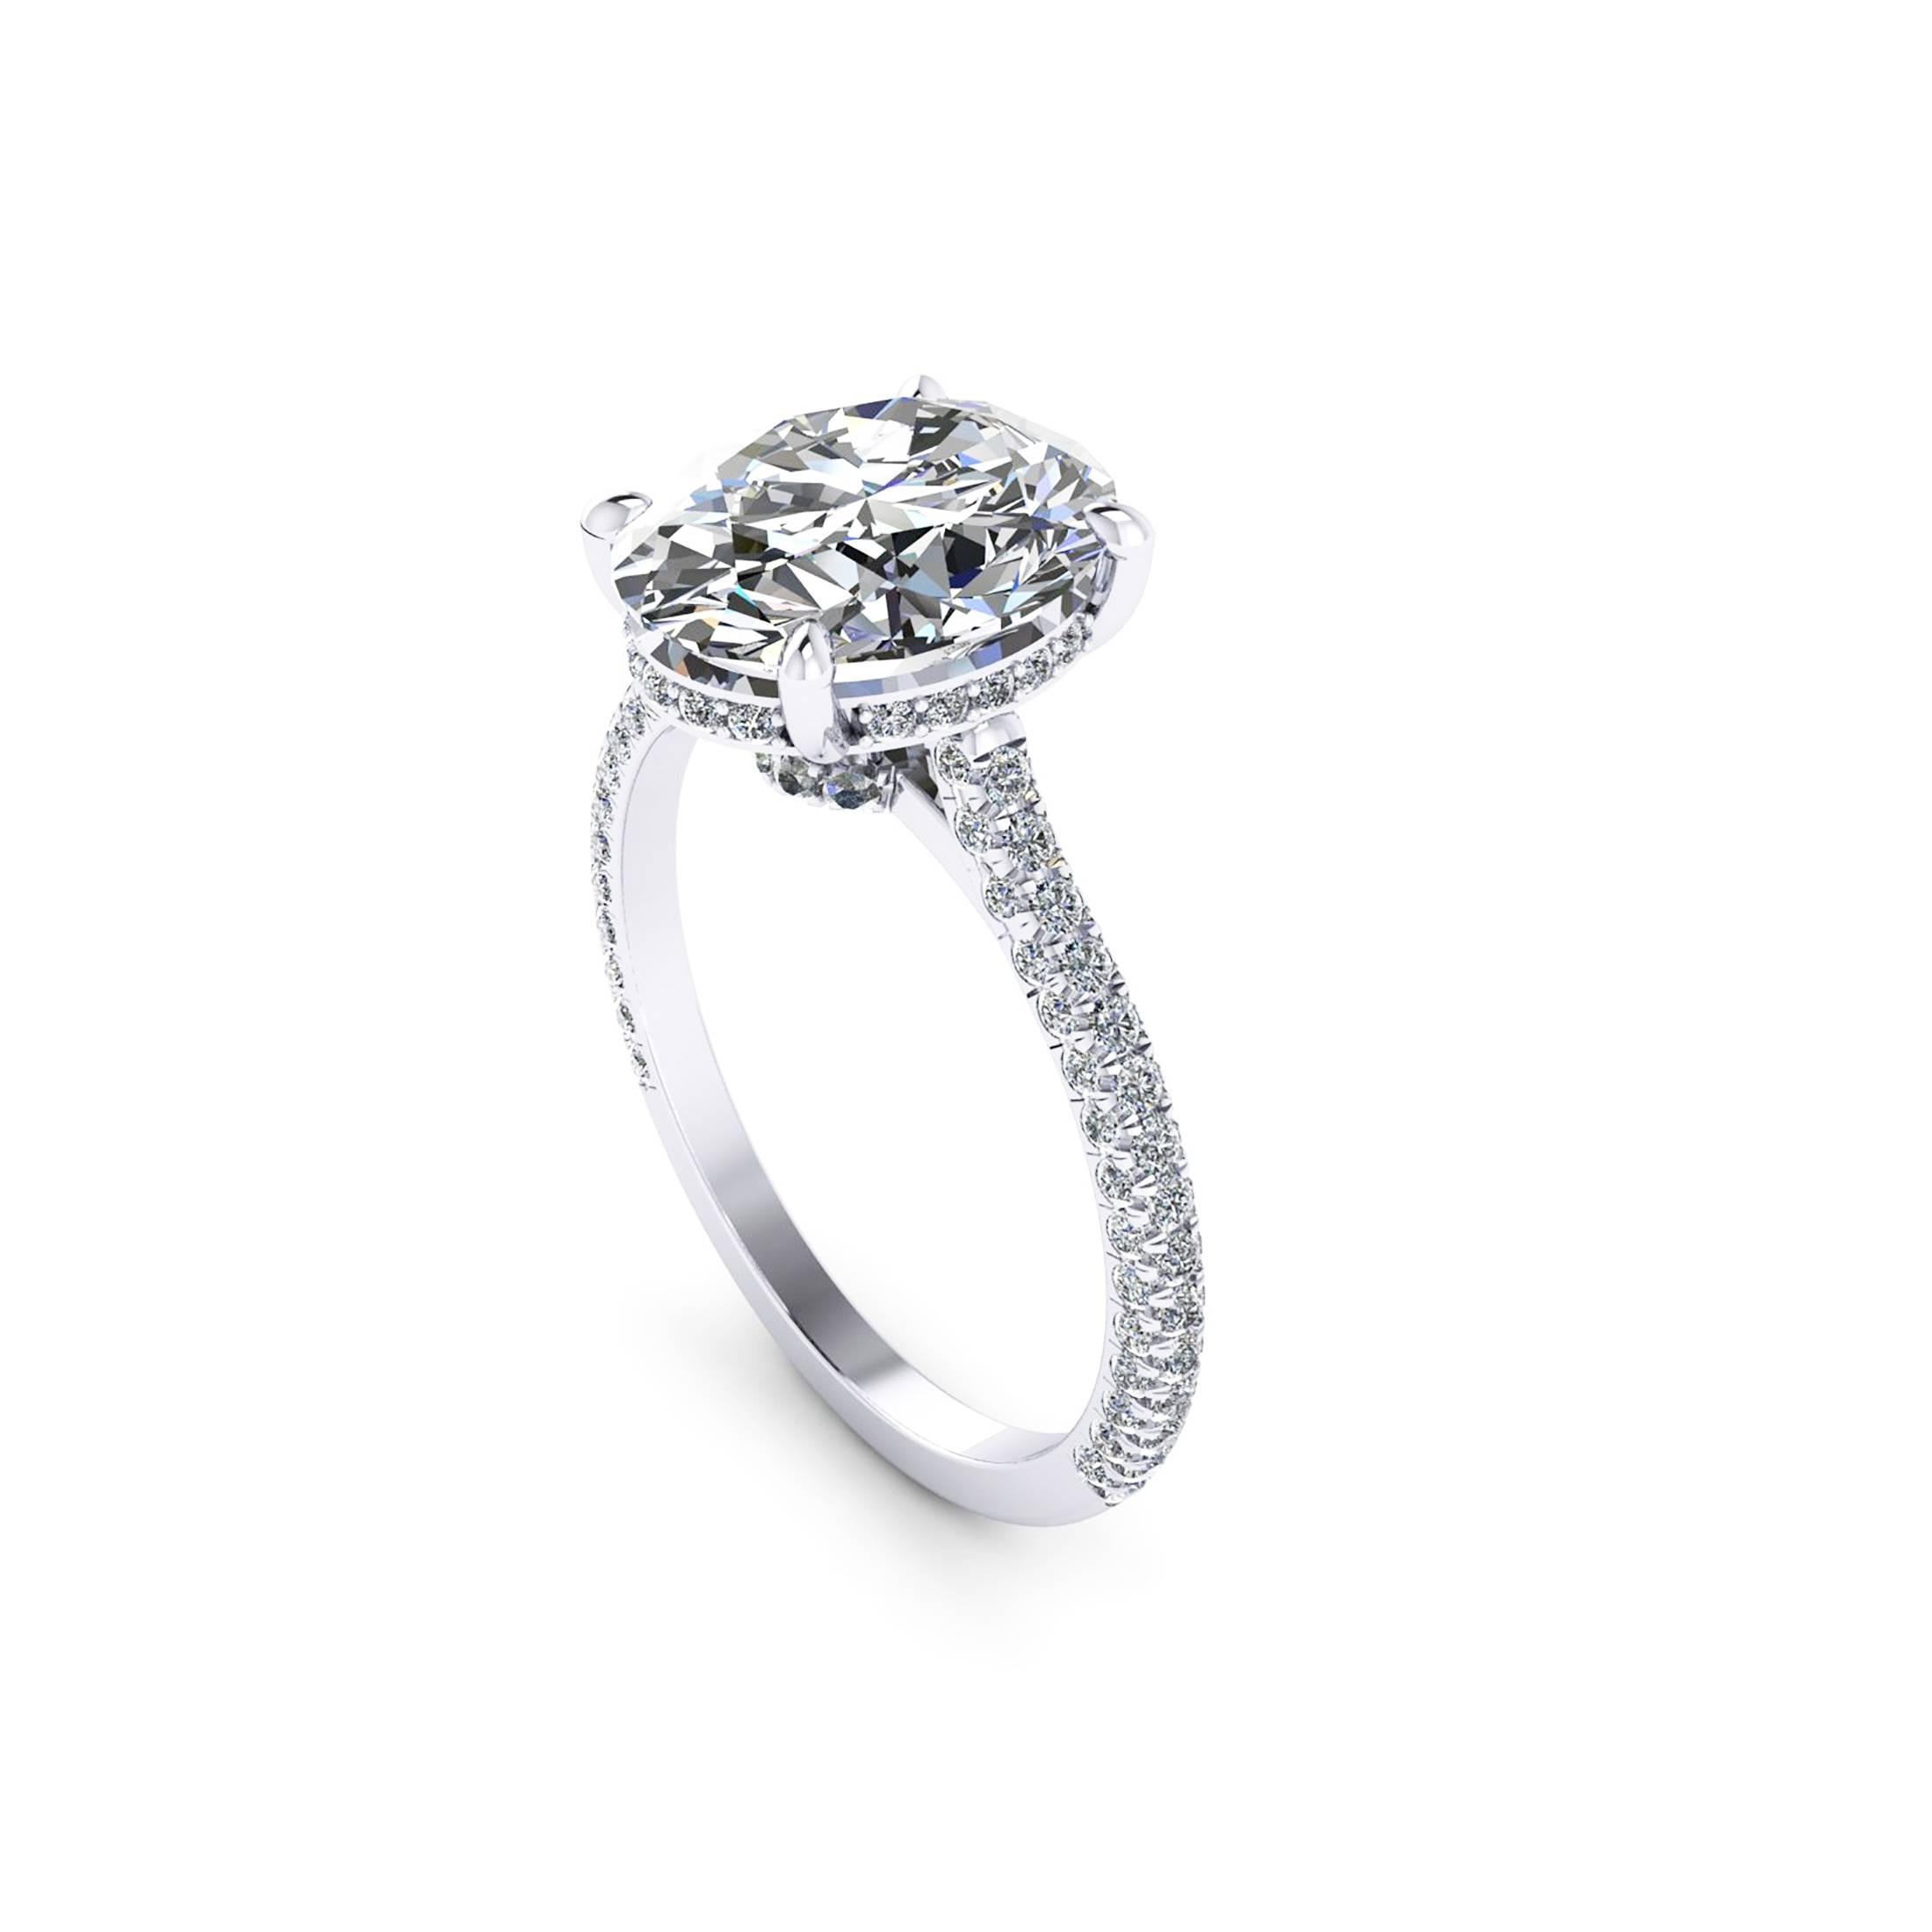 GIA Certified 2.52 carats Oval diamond cut, SI1 Clarity, Triple Excellent specs, clean at the eyes, maximum sparkle, in an hand made Platinum 950 engagement ring, adorned with a shower of ultra white diamonds, hand set, on almost every surface of